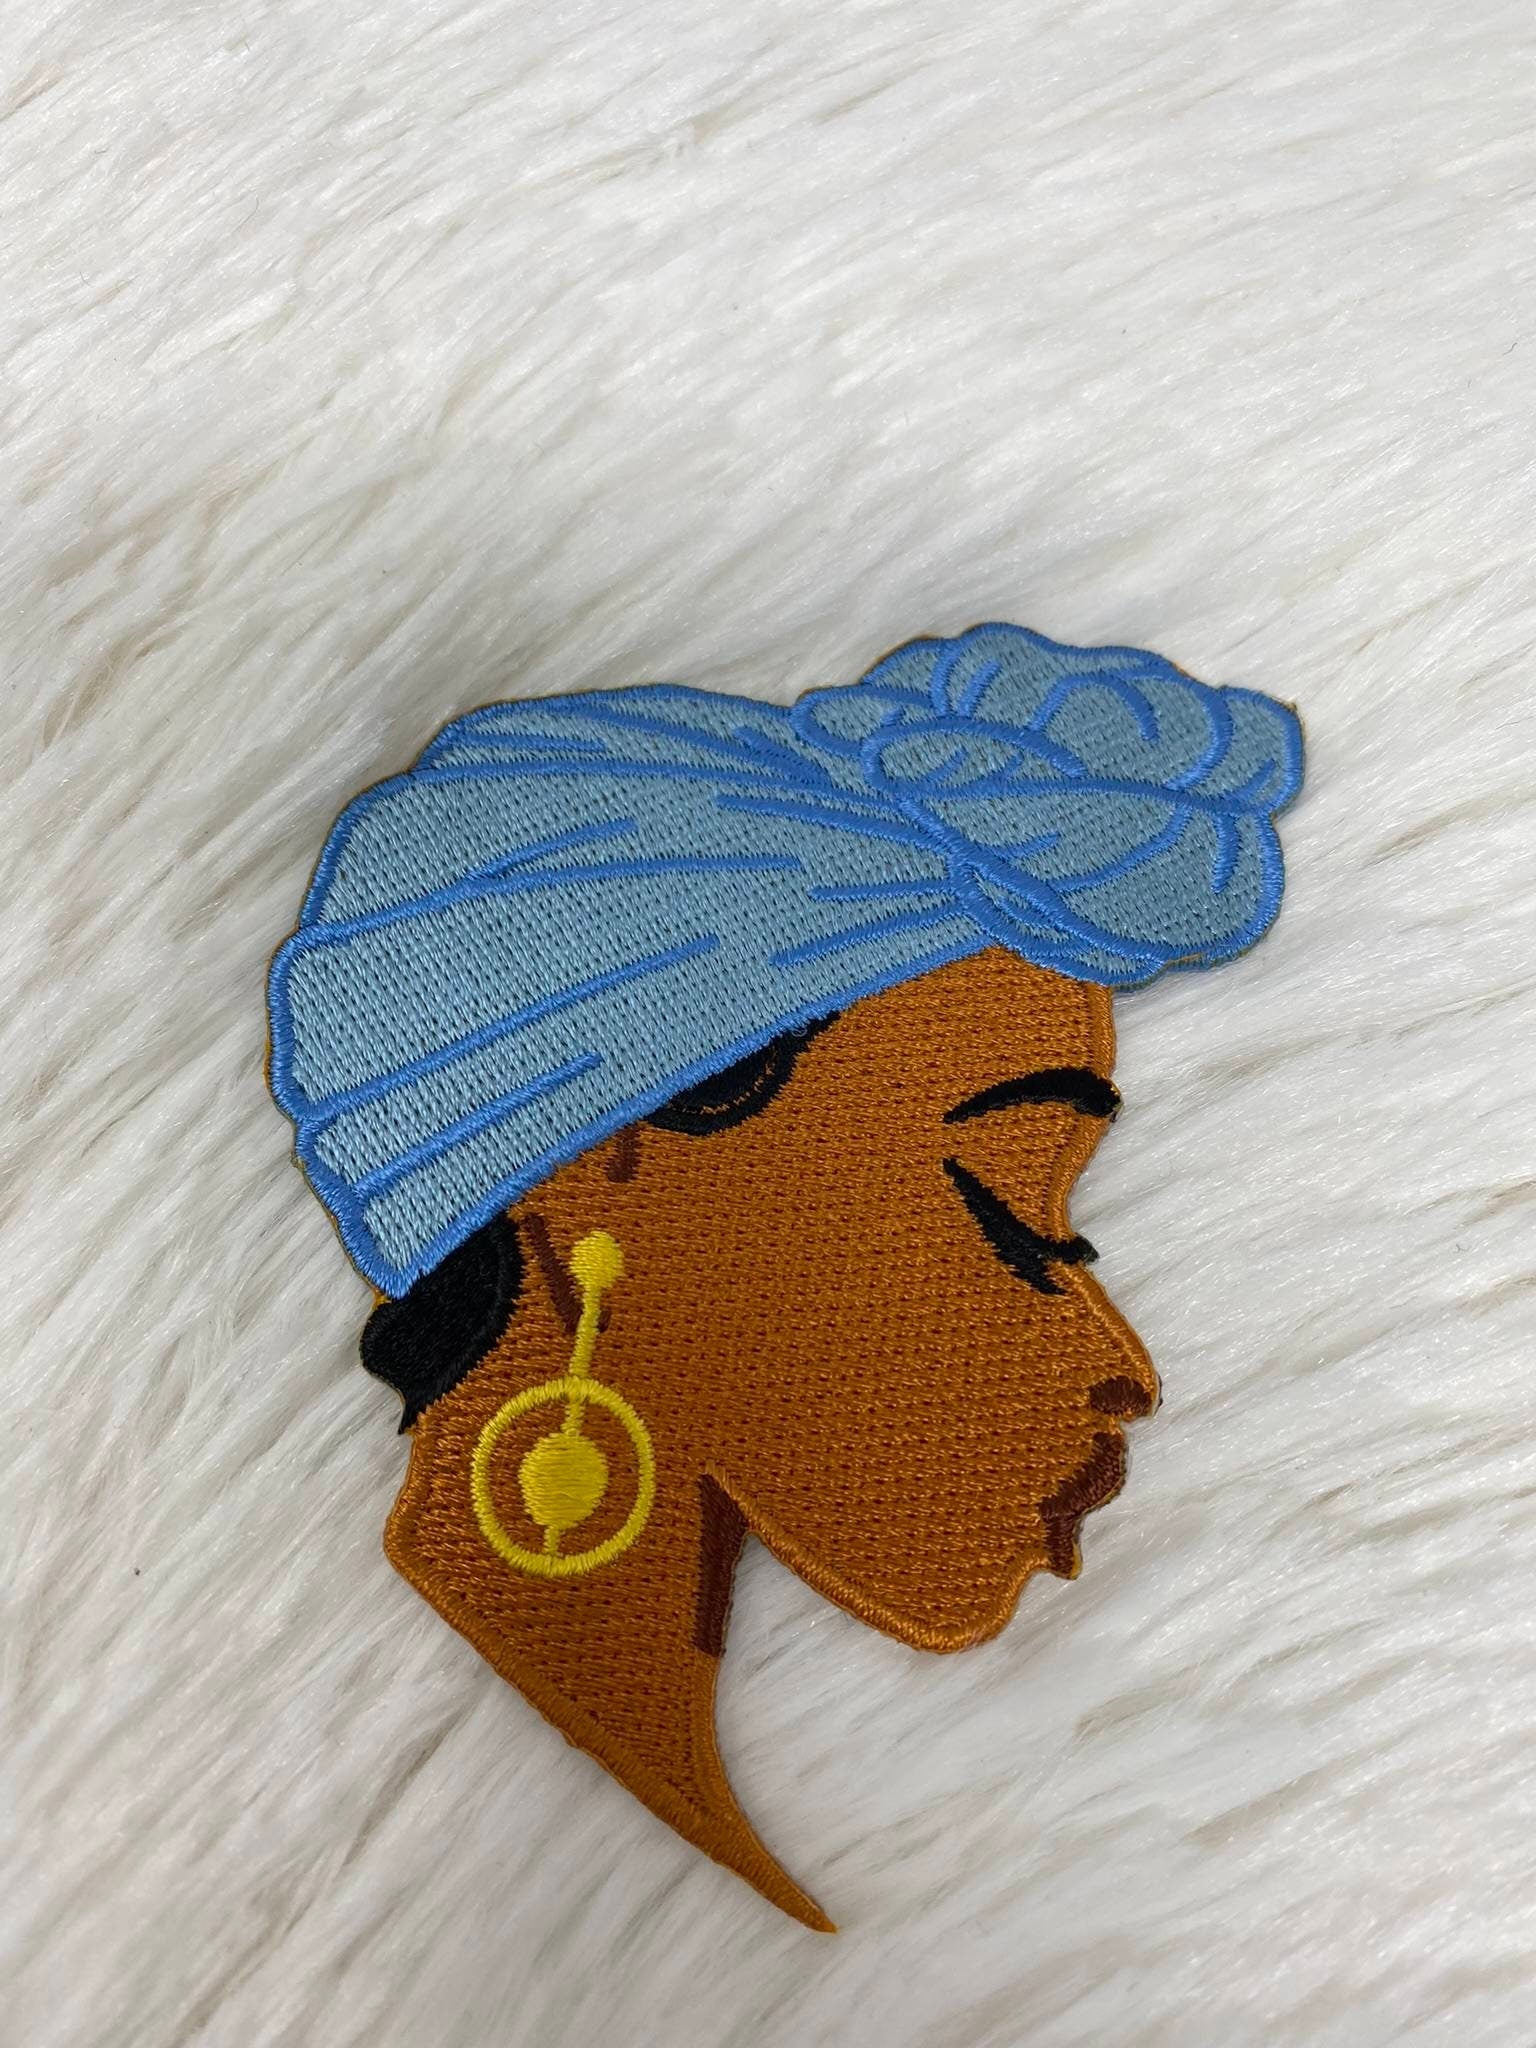 NEW, Meditating Cutie Embroidered Iron-on Patch, with "Aqua Blue Head Wrap" Size 4", Small Patch for Hats, Camos, Crocs, and Shoes